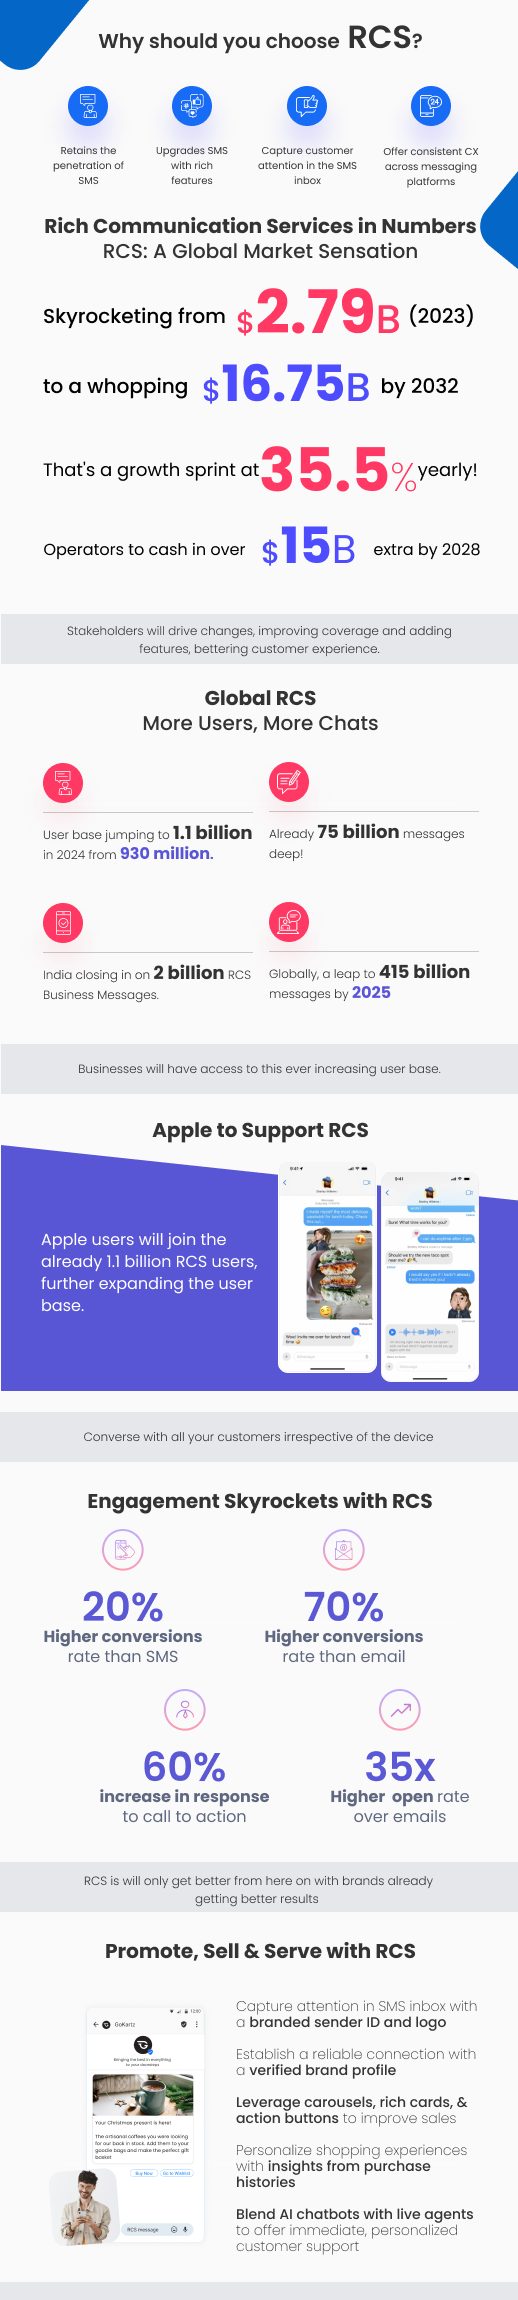 RCS will catapulate business messaging in 2024, letting brands capture customer attention in the SMS inbox